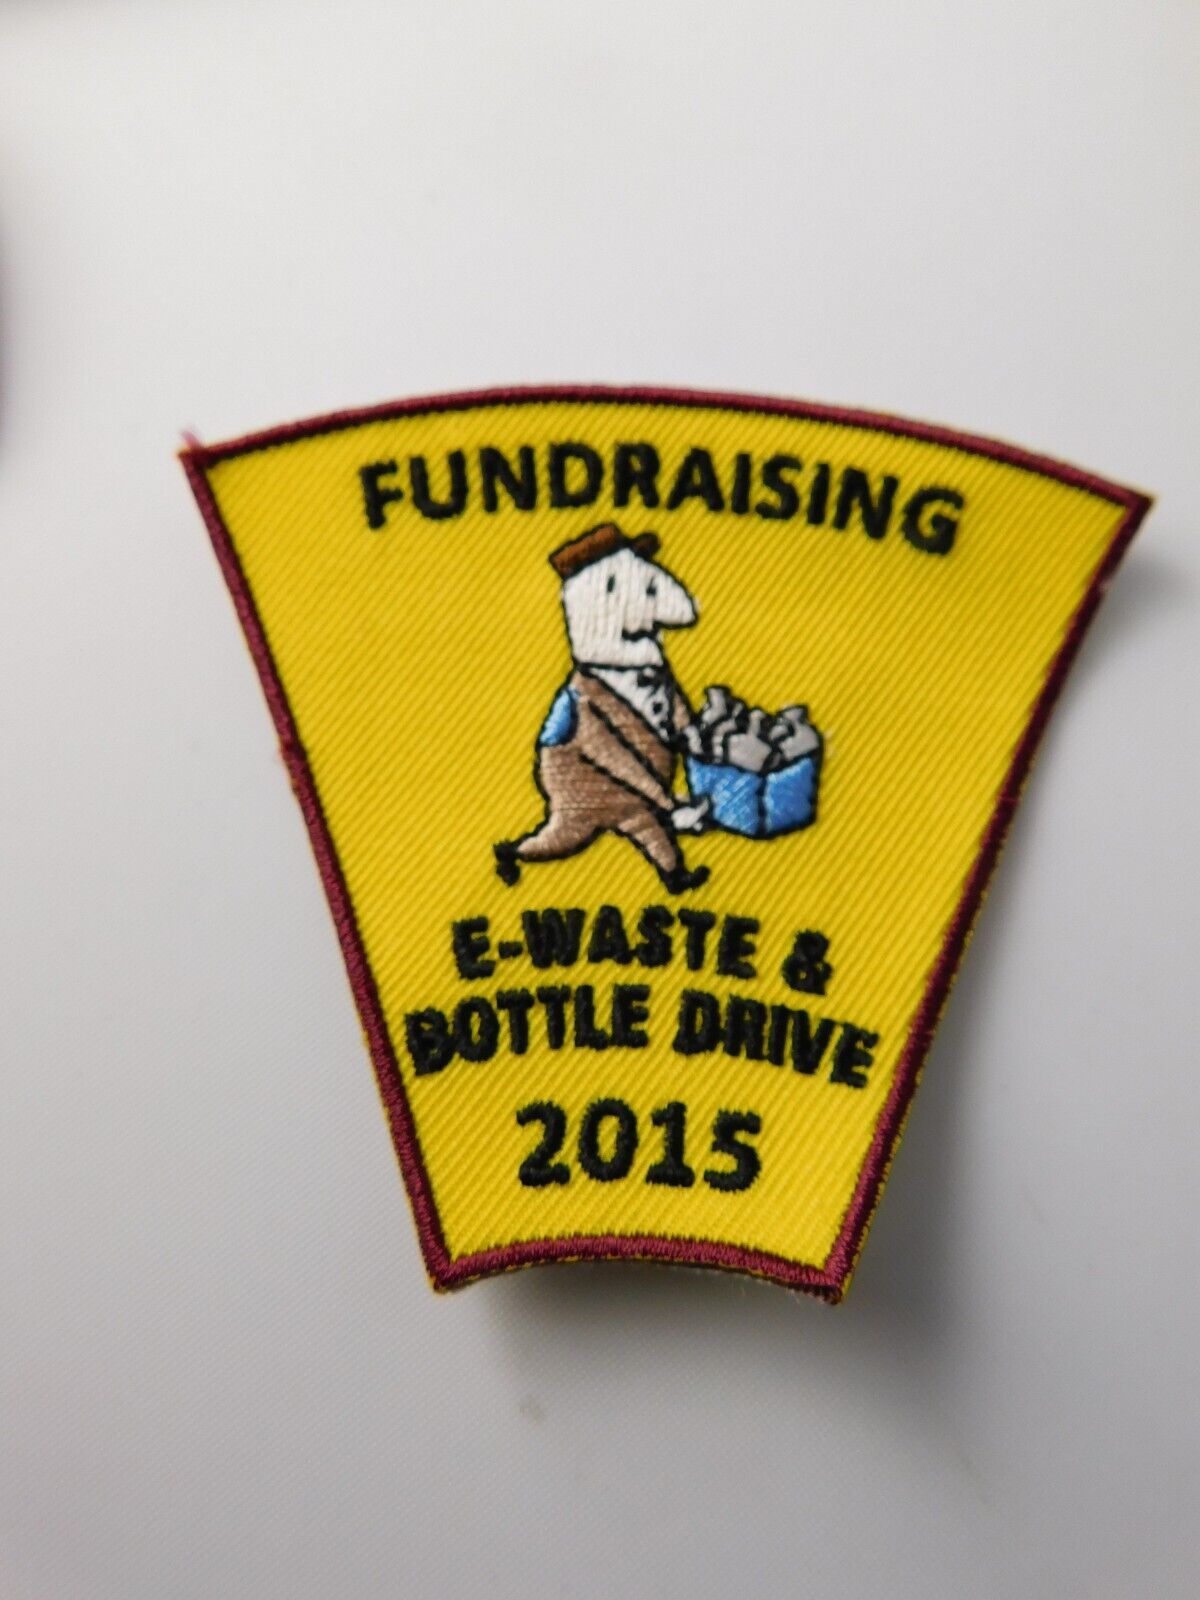 BOY SCOUTS CANADA PATCH FUND RAISING E WASTE & BOTTLE DRIVE 2015 AWARD  BADGE